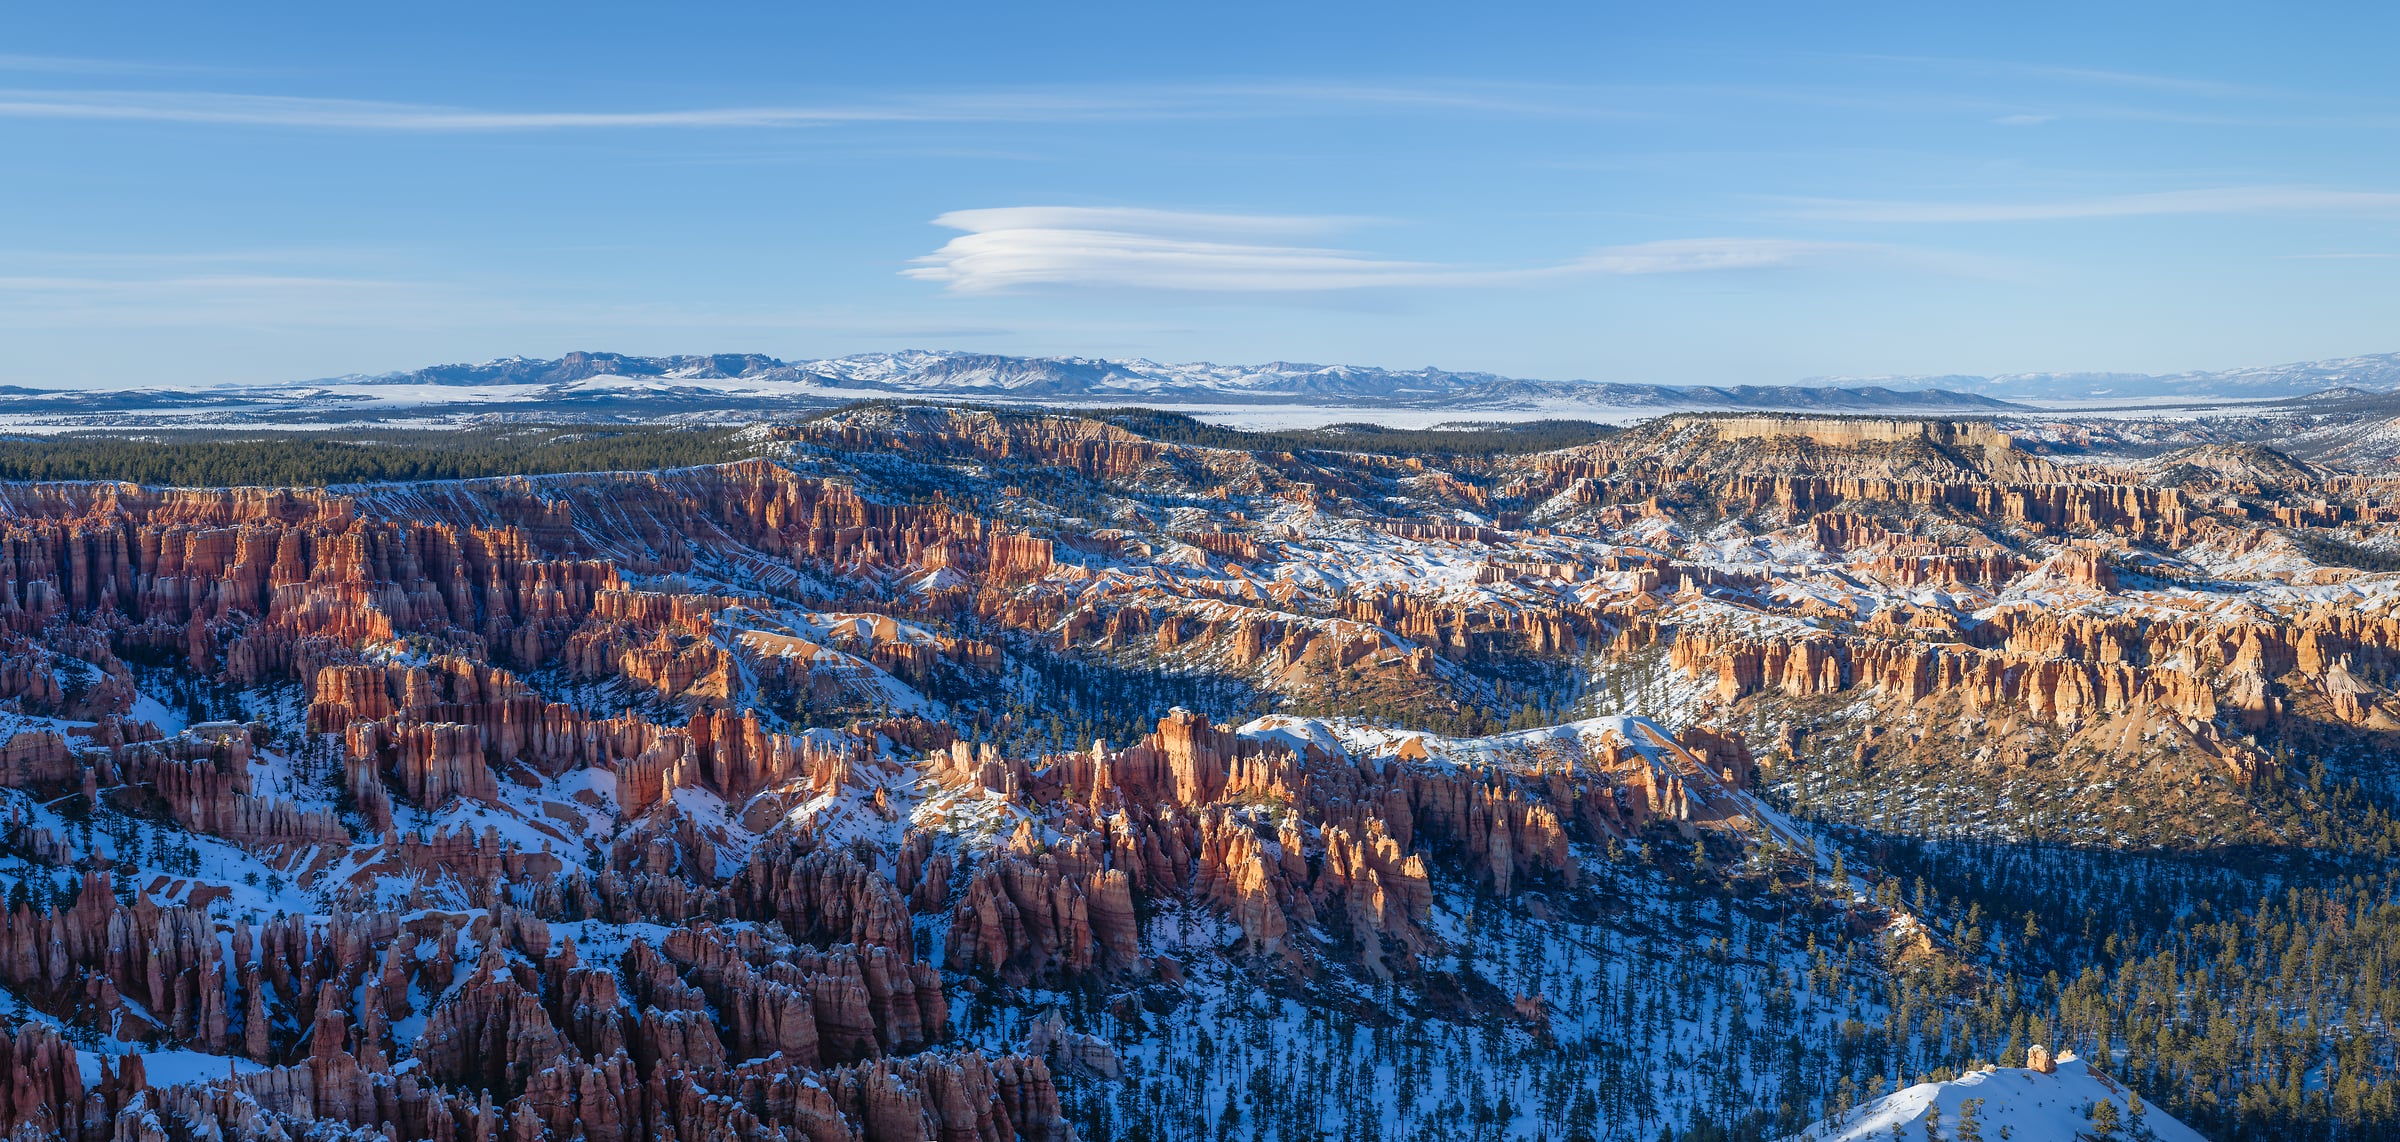 535 megapixels! A very high resolution, large-format VAST photo print of Bryce Canyon after a snowfall; landscape photograph created by Greg Probst in Bryce Canyon National Park